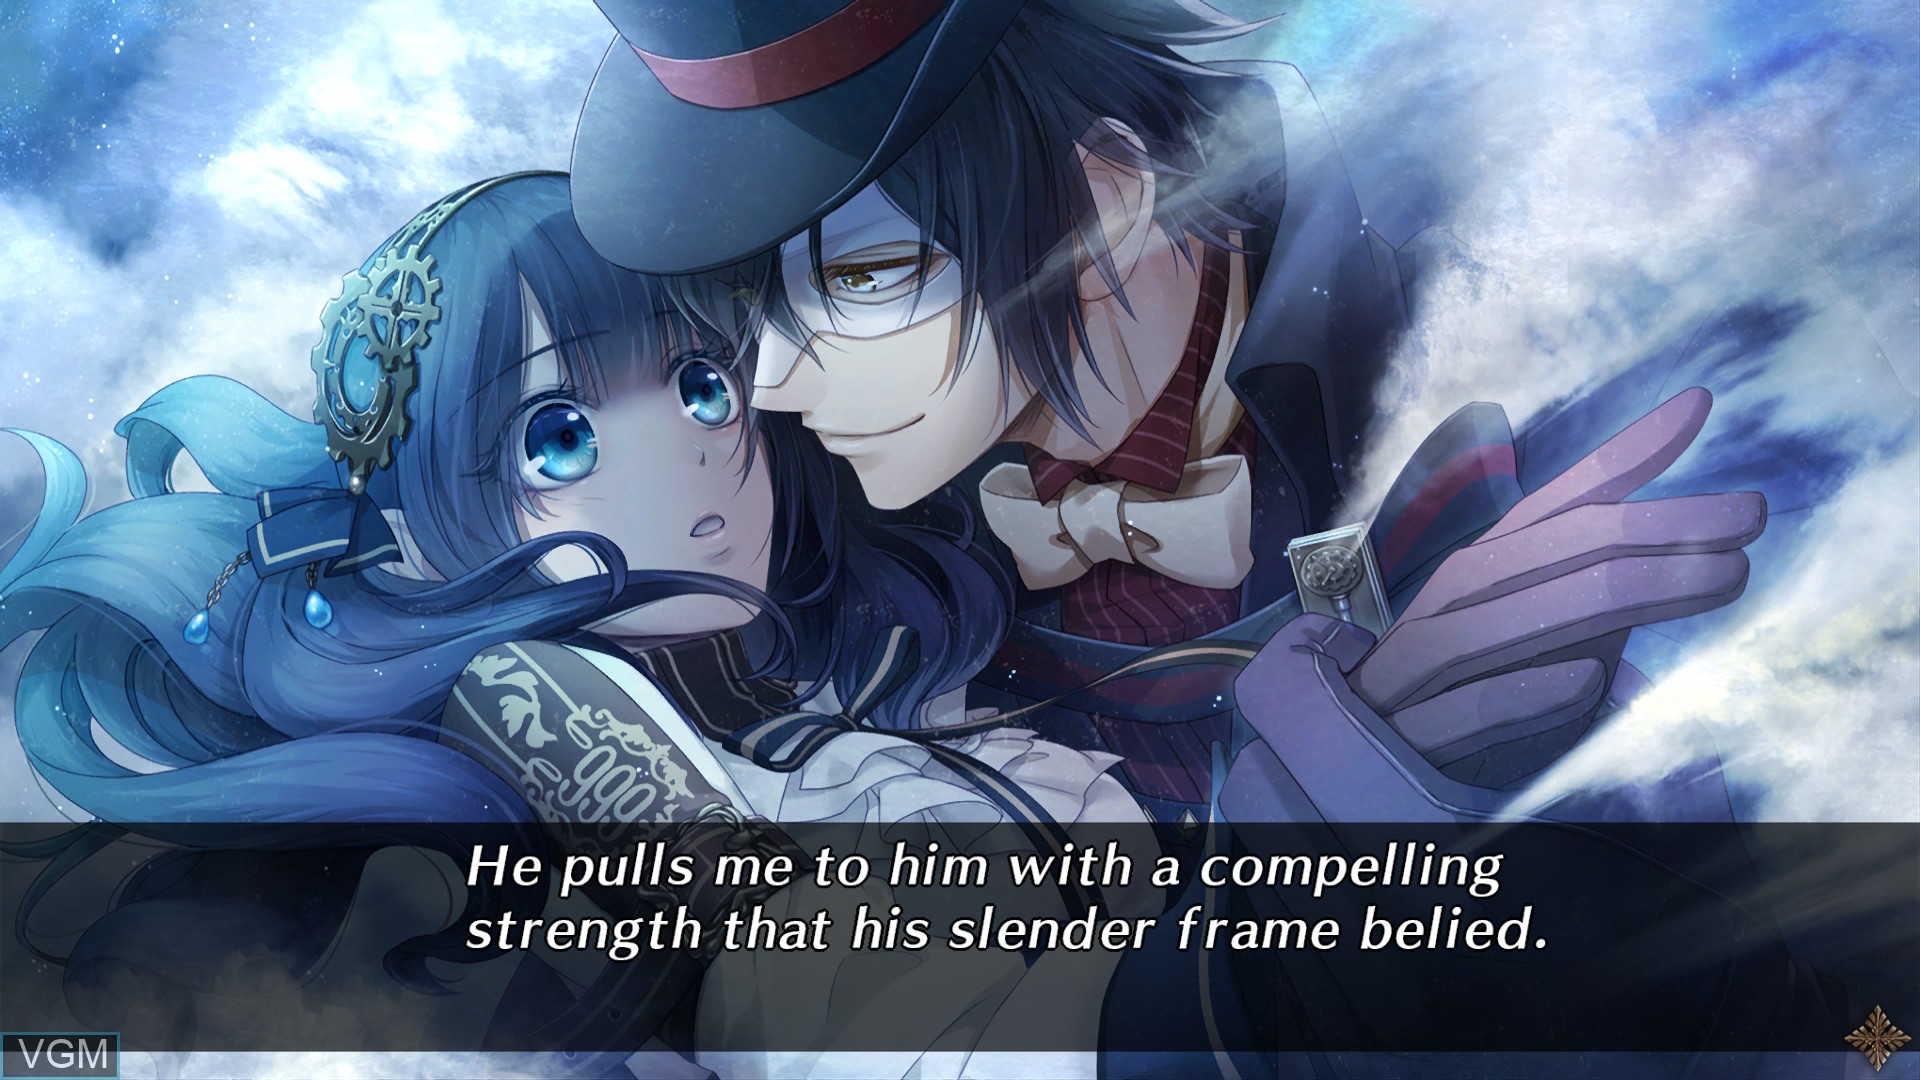 Code Realize - Guardian of Rebirth